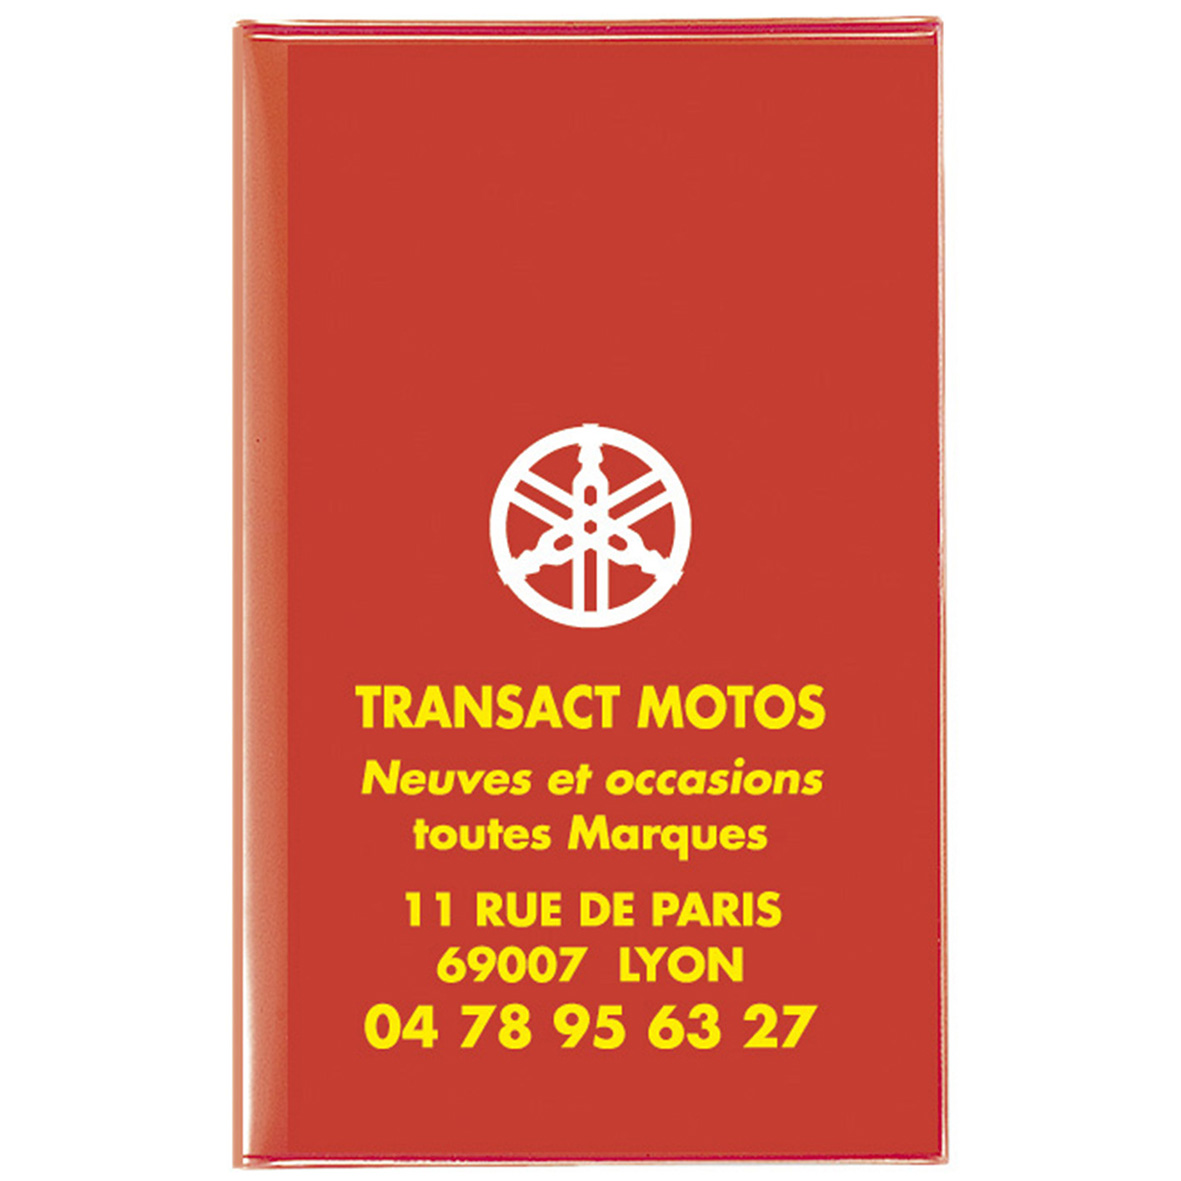 Porte carte grise made in France cotWA40A - Objets publicitaires